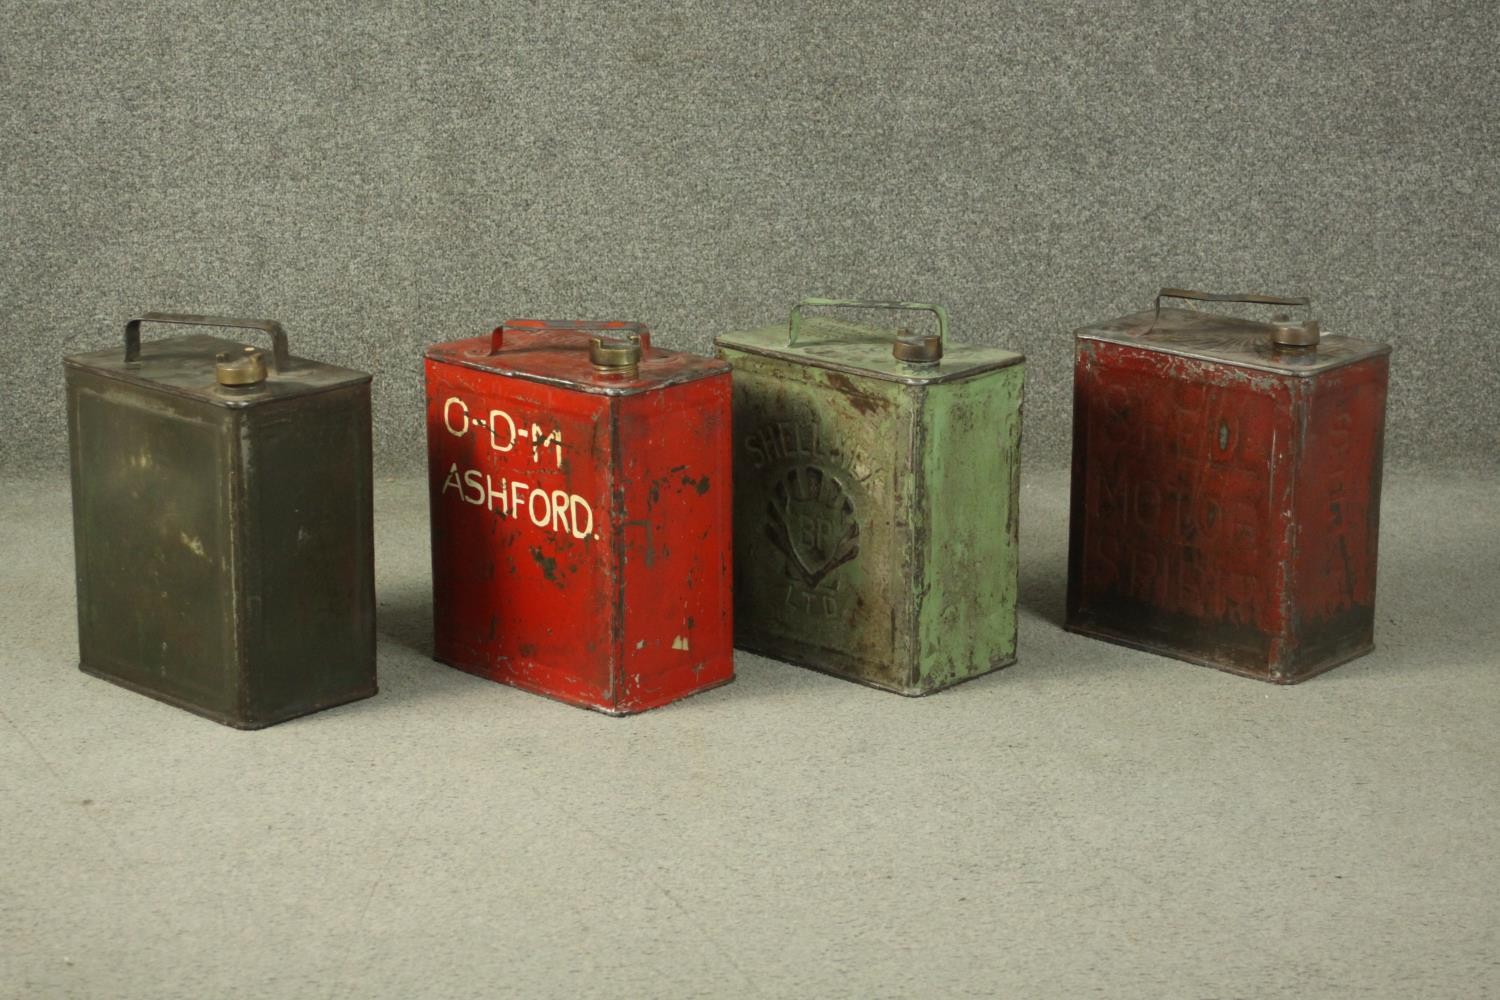 Four 20th century painted metal Jerry cans, marked for O-D-M Ashford, Insect Repellent, BP Ltd Shell